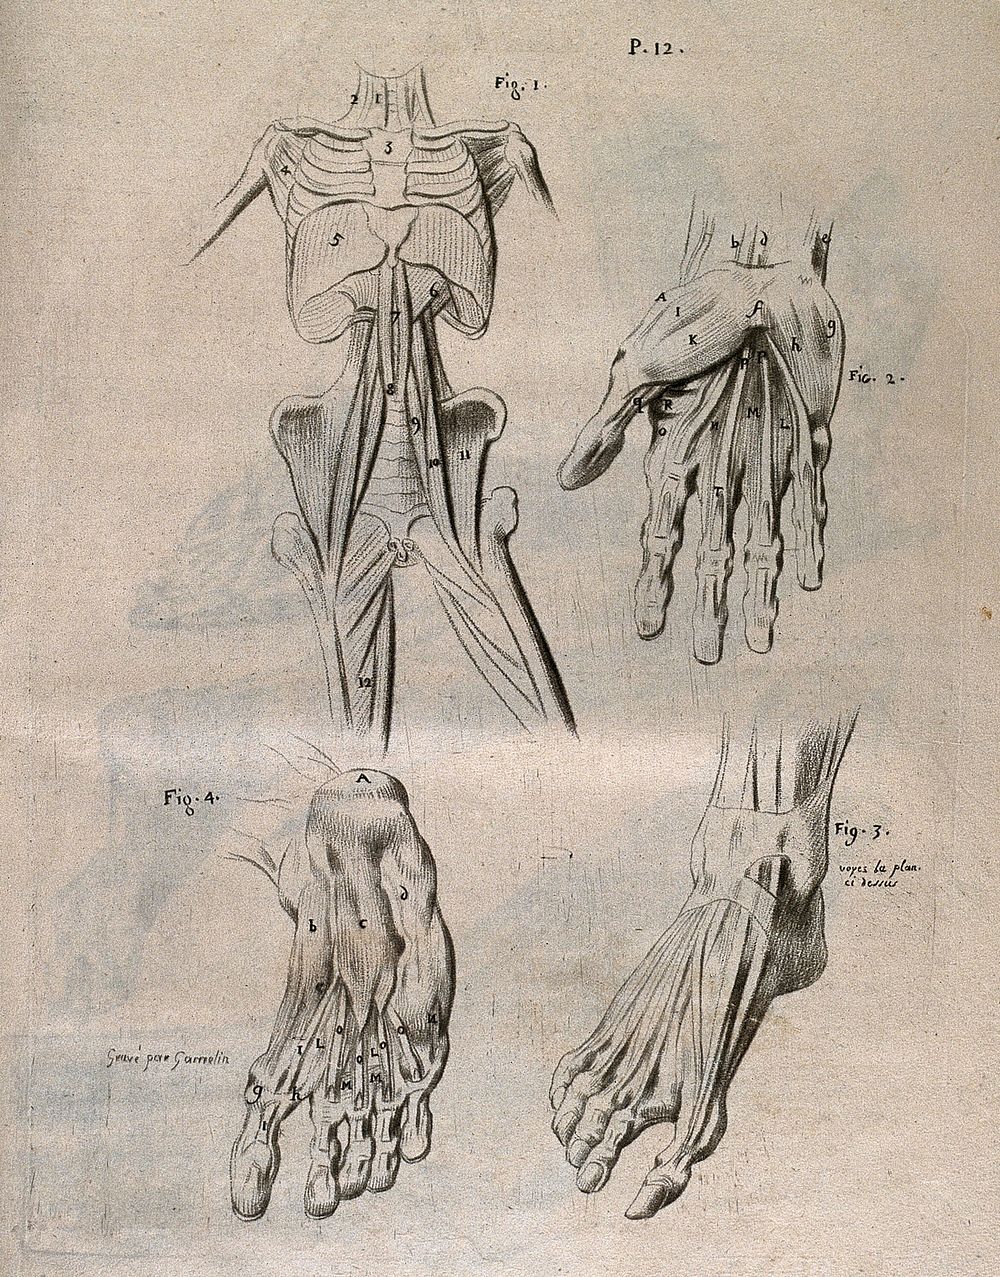 Four écorché figures, showing the deep muscles of the axial skeleton (torso), hands and feet. Crayon manner print by J.…